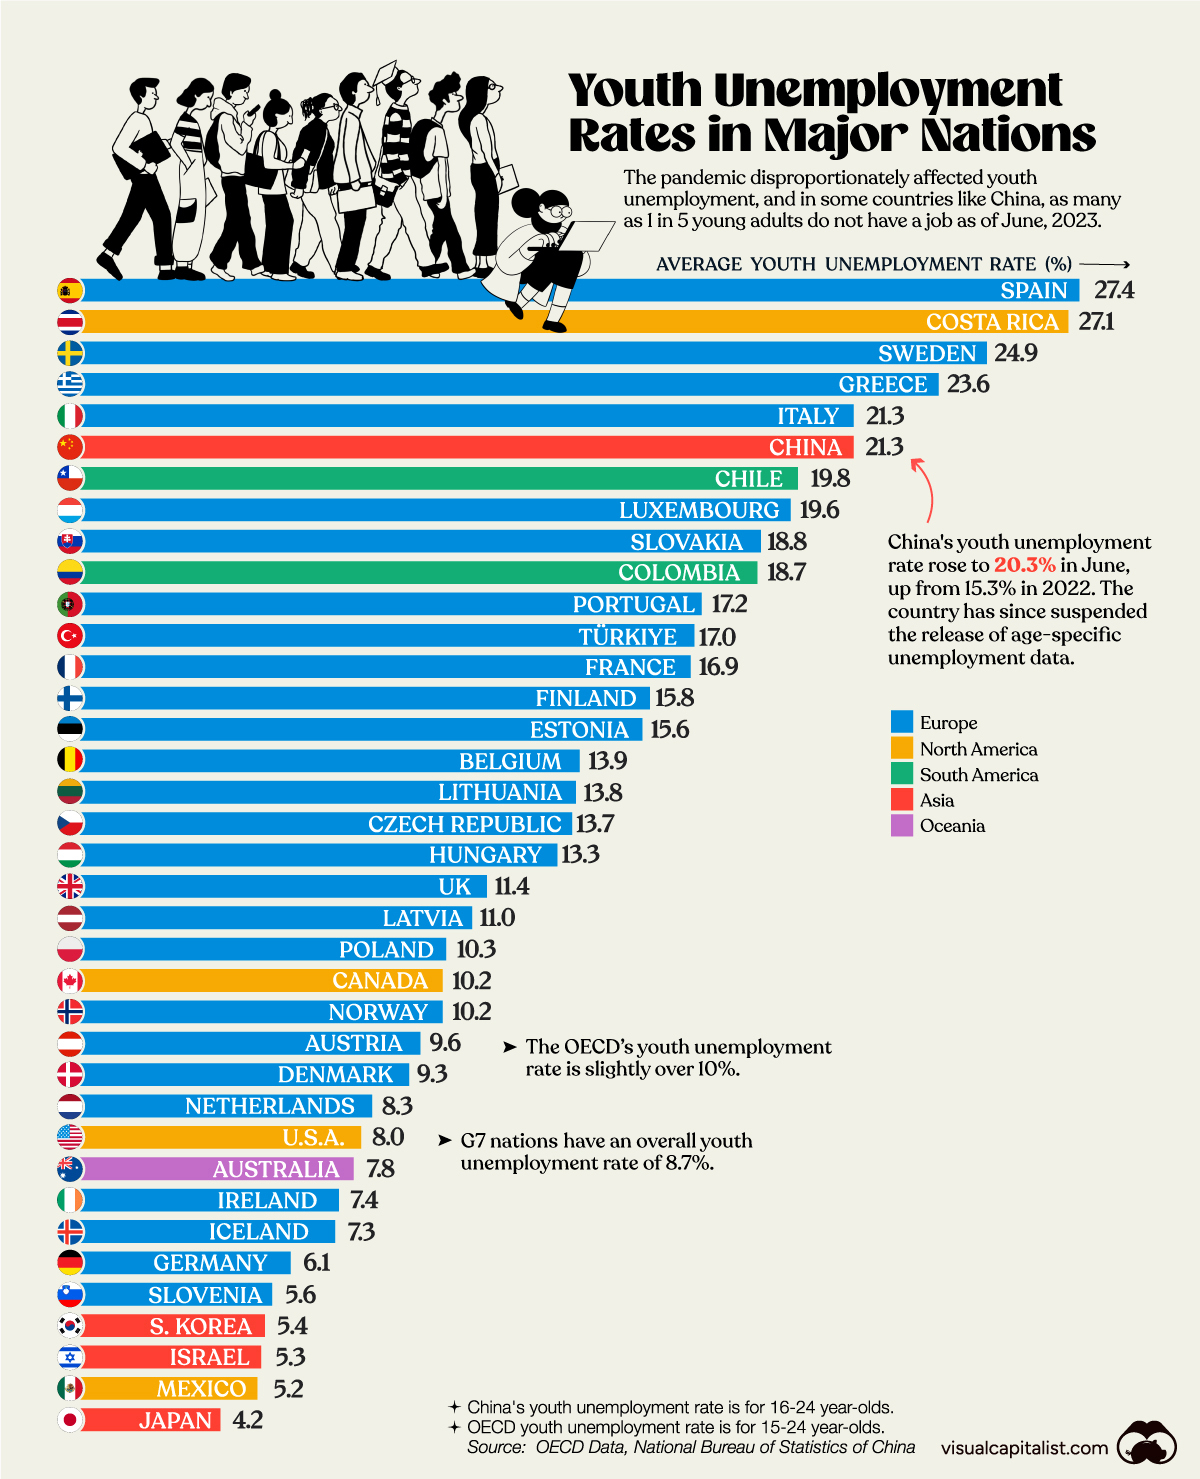 A bar chart showing the youth unemployment rates of all OECD countries and China.